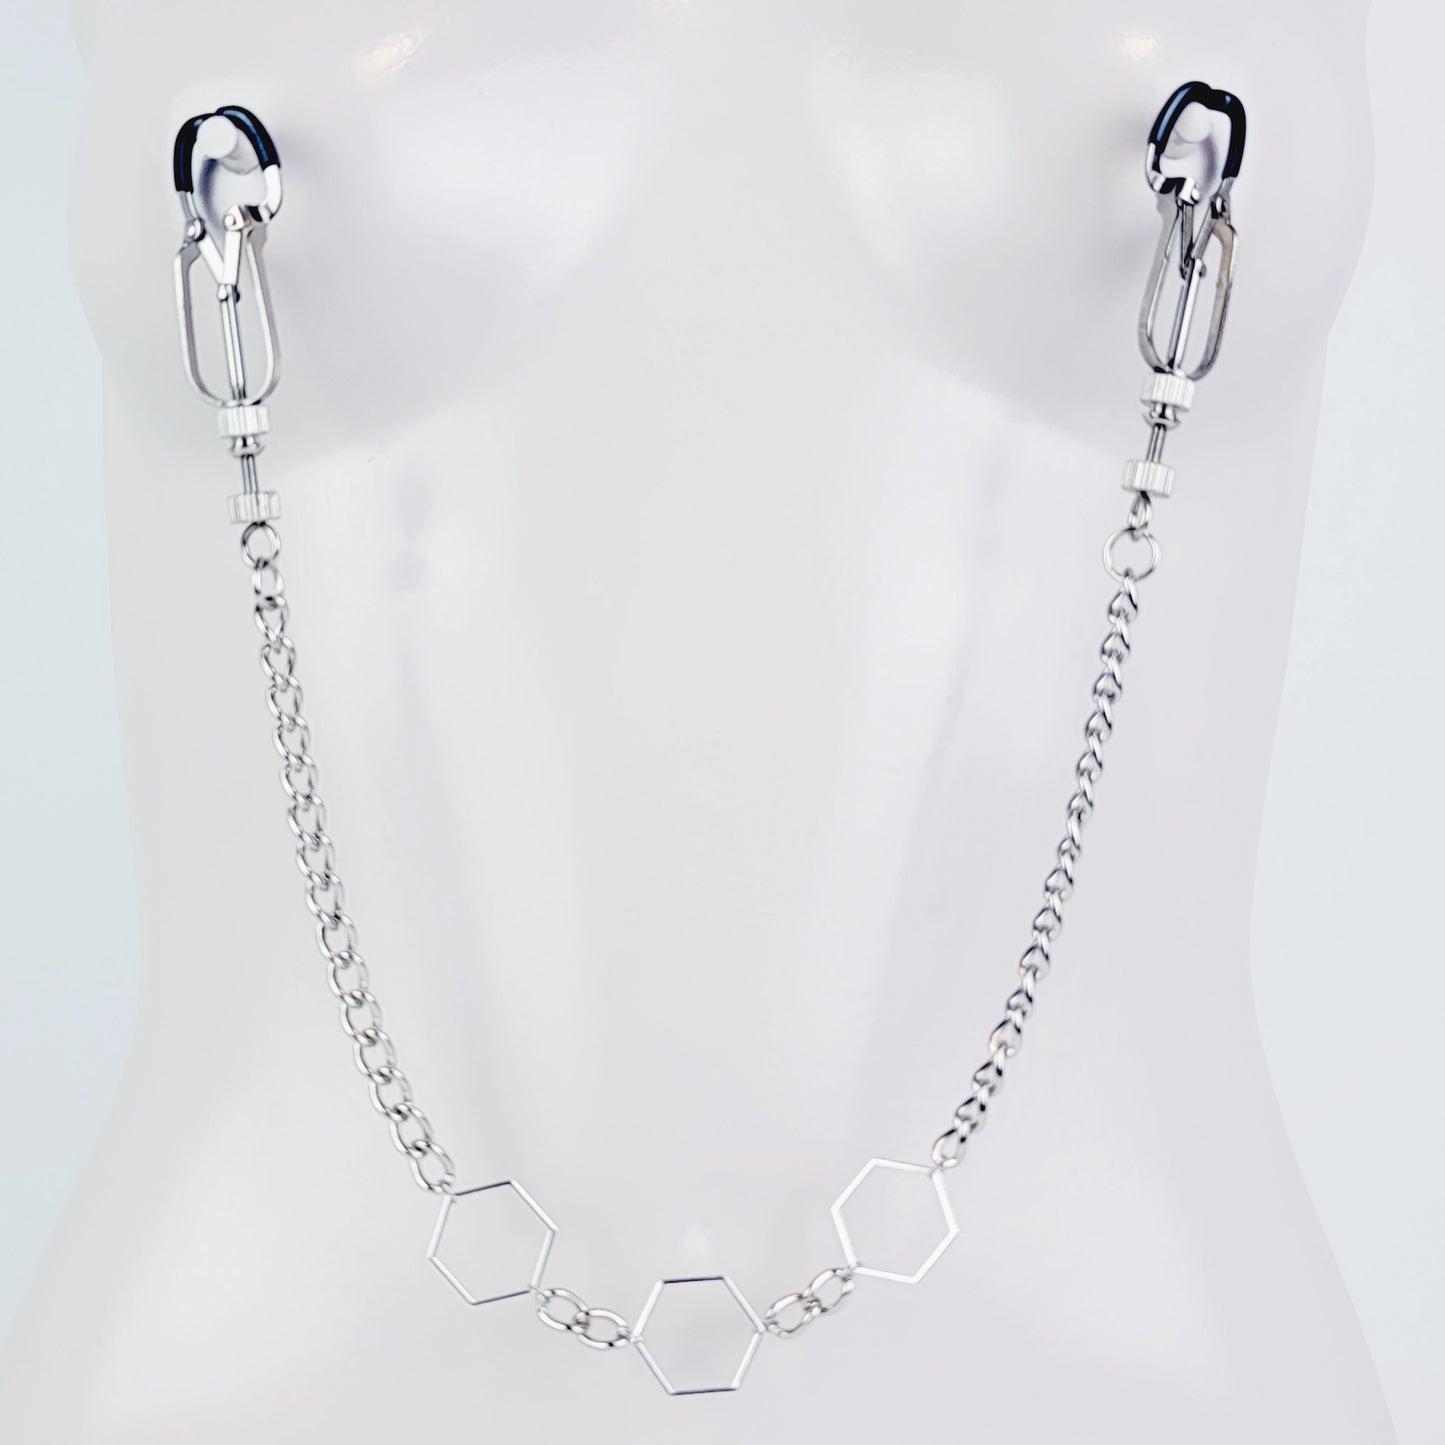 BDSM Nipple Clamps. Beetle Clamps with Hexagons and Chain.